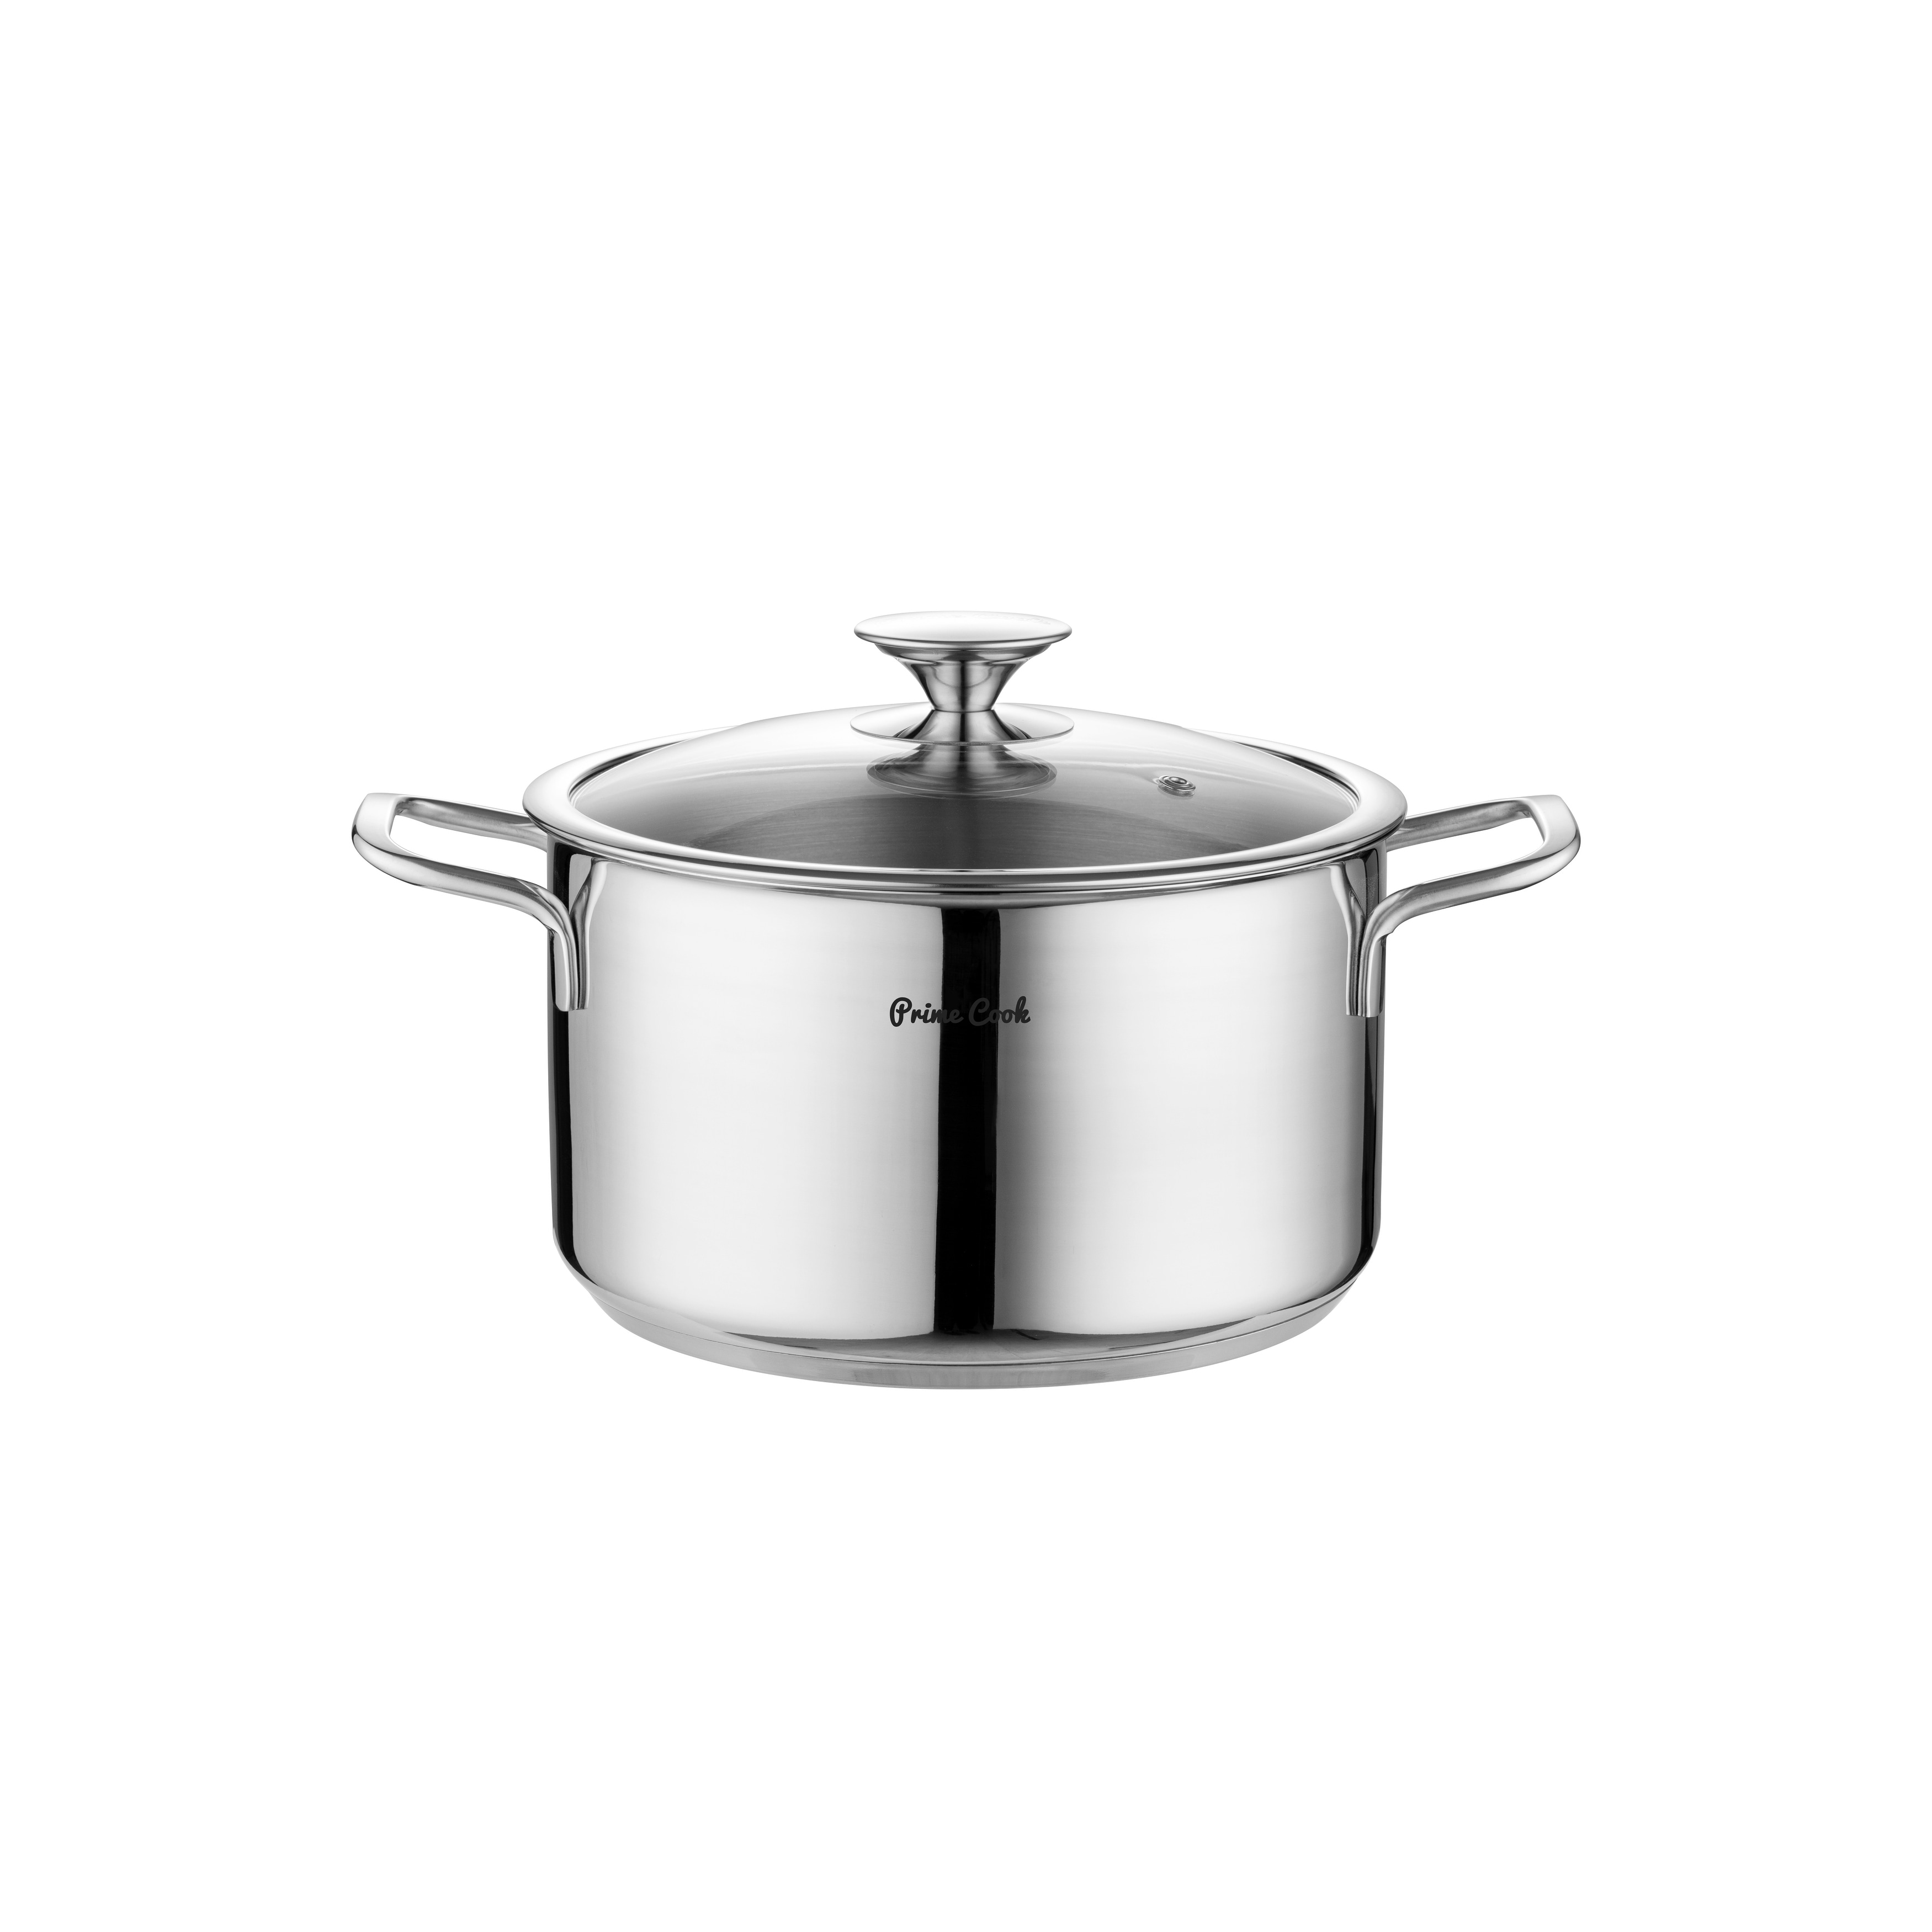 https://ak1.ostkcdn.com/images/products/is/images/direct/01ac31f766b81a63e2839cd4fa88f04e02553a16/Prime-Cook-4-qt.-Stainless-Steel-Soup-Pot-with-Lid.jpg